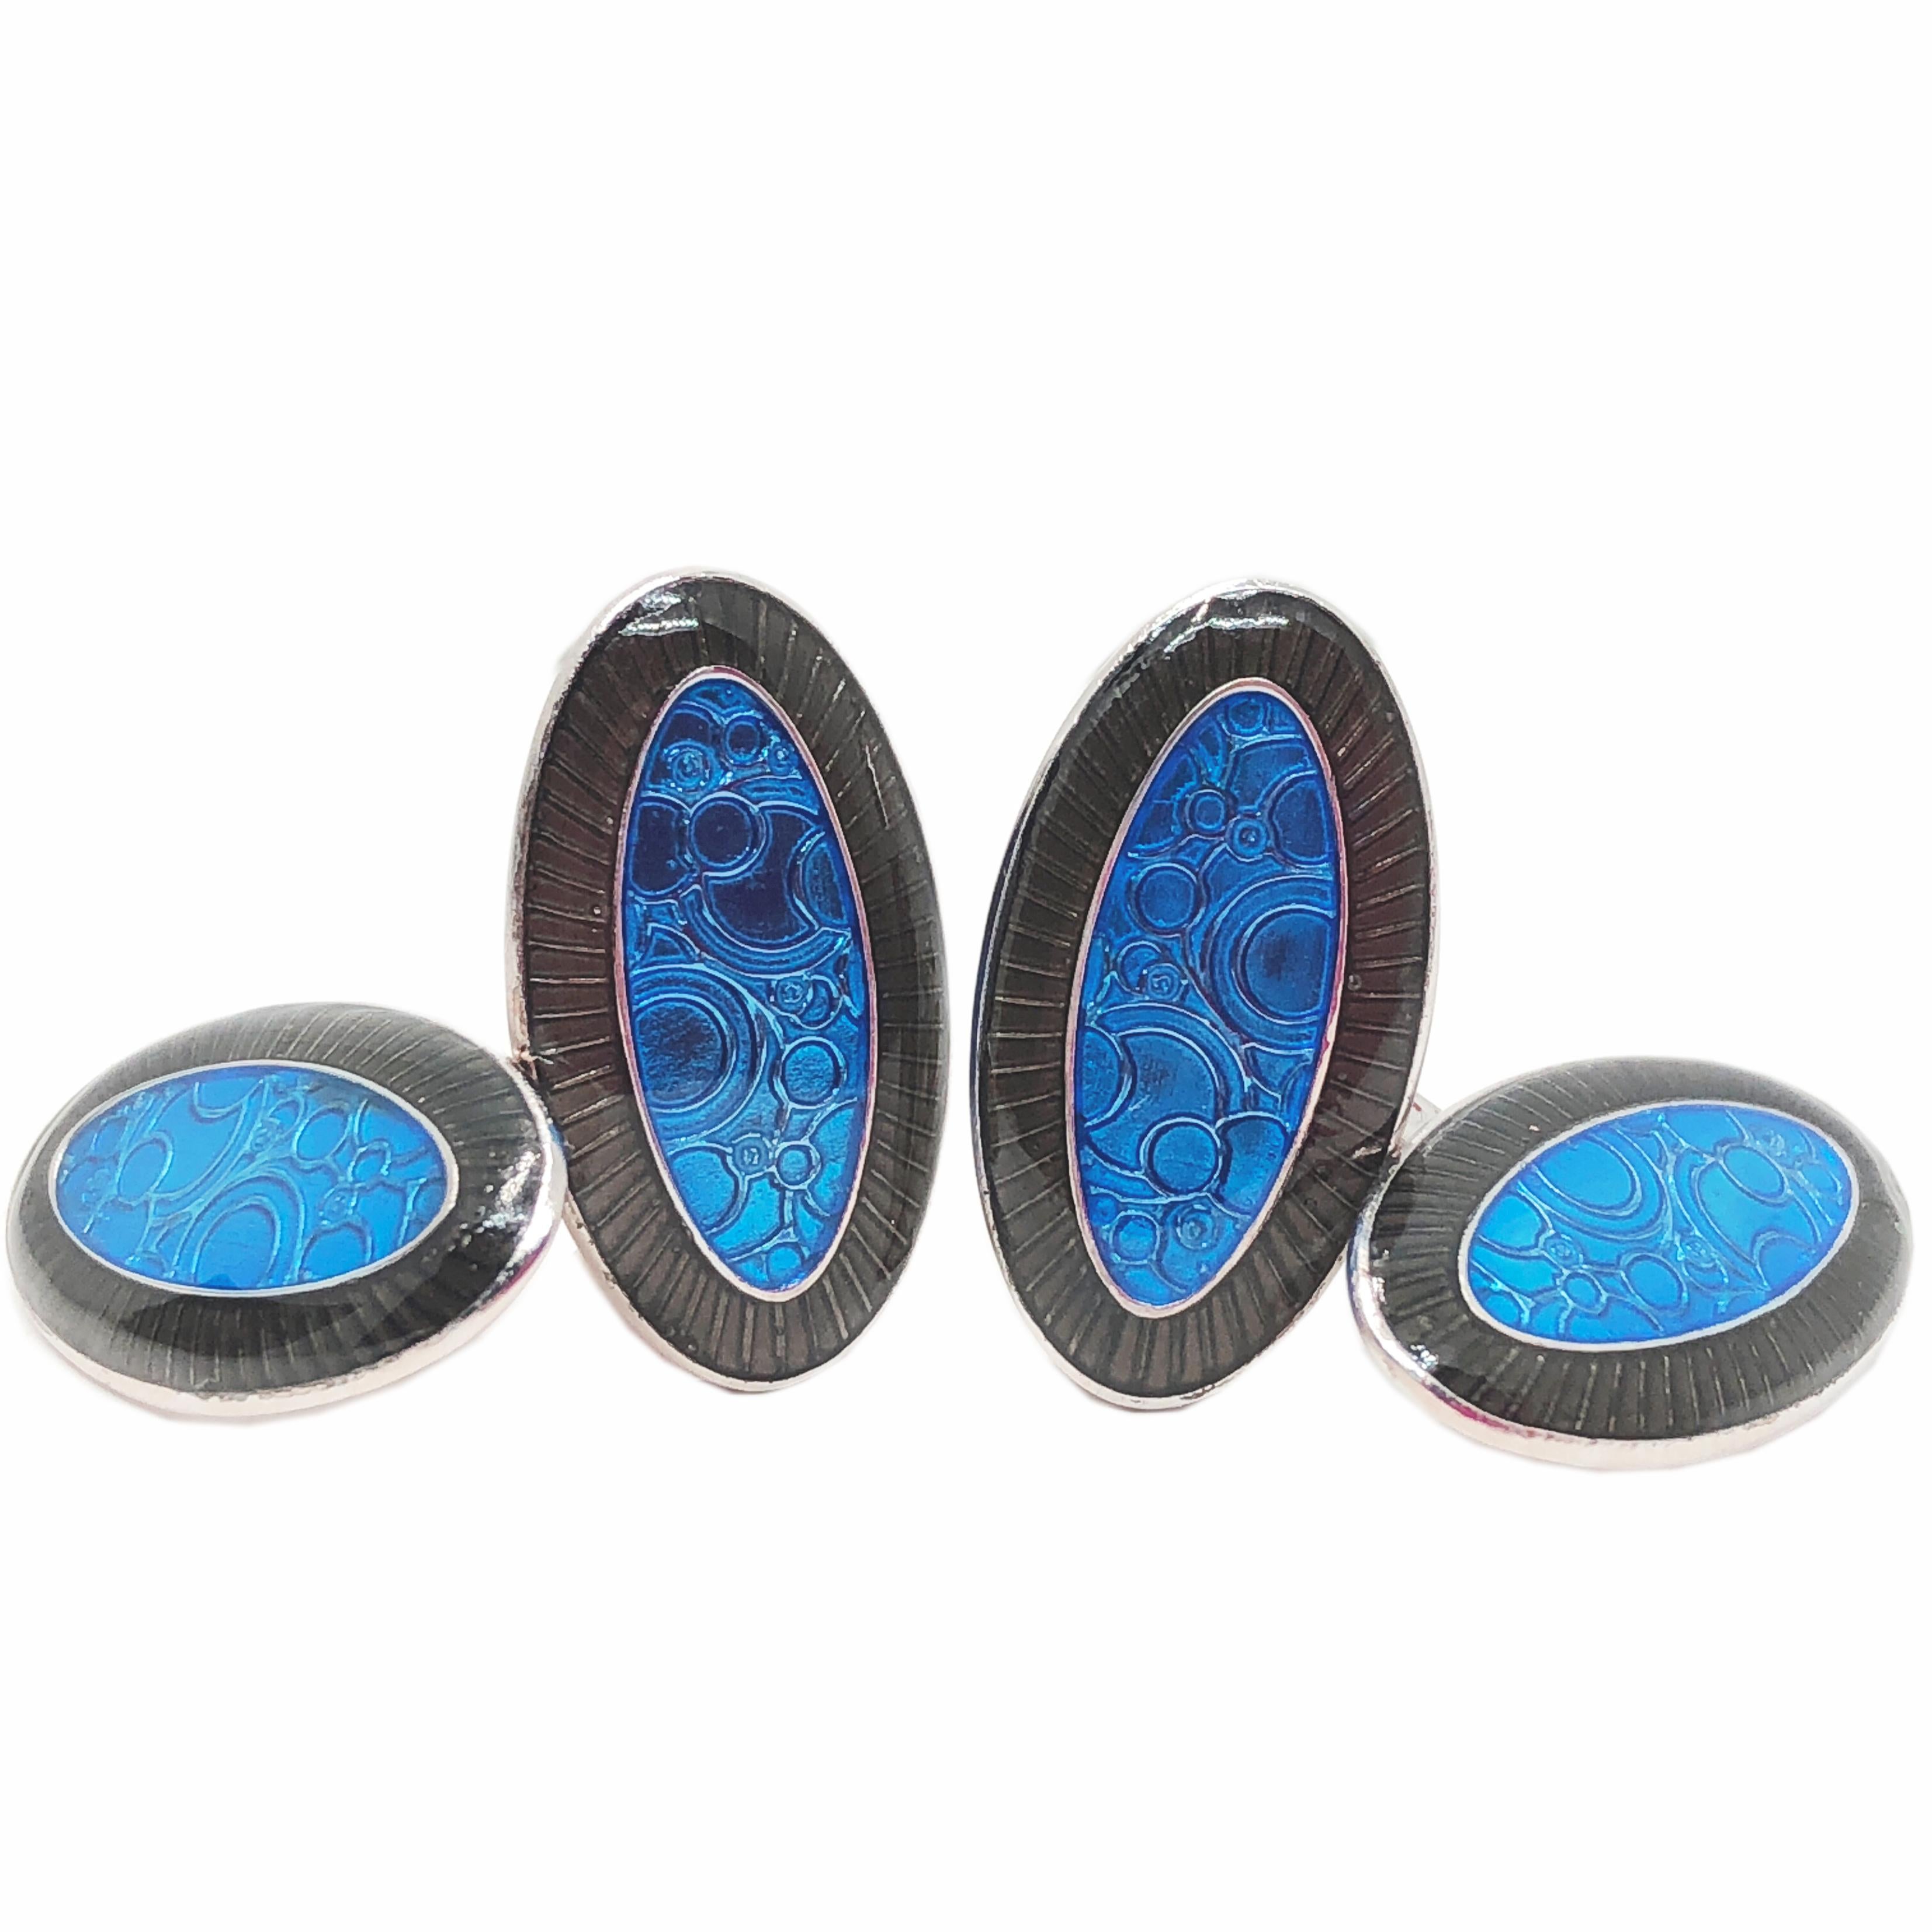 Unique Oval Hand Enamelled blue and gunmetal grey sterling silver cufflinks, champlevé technique.
This piece is a limited edition of an 1920s pair of cufflinks found in Berca's archives.

